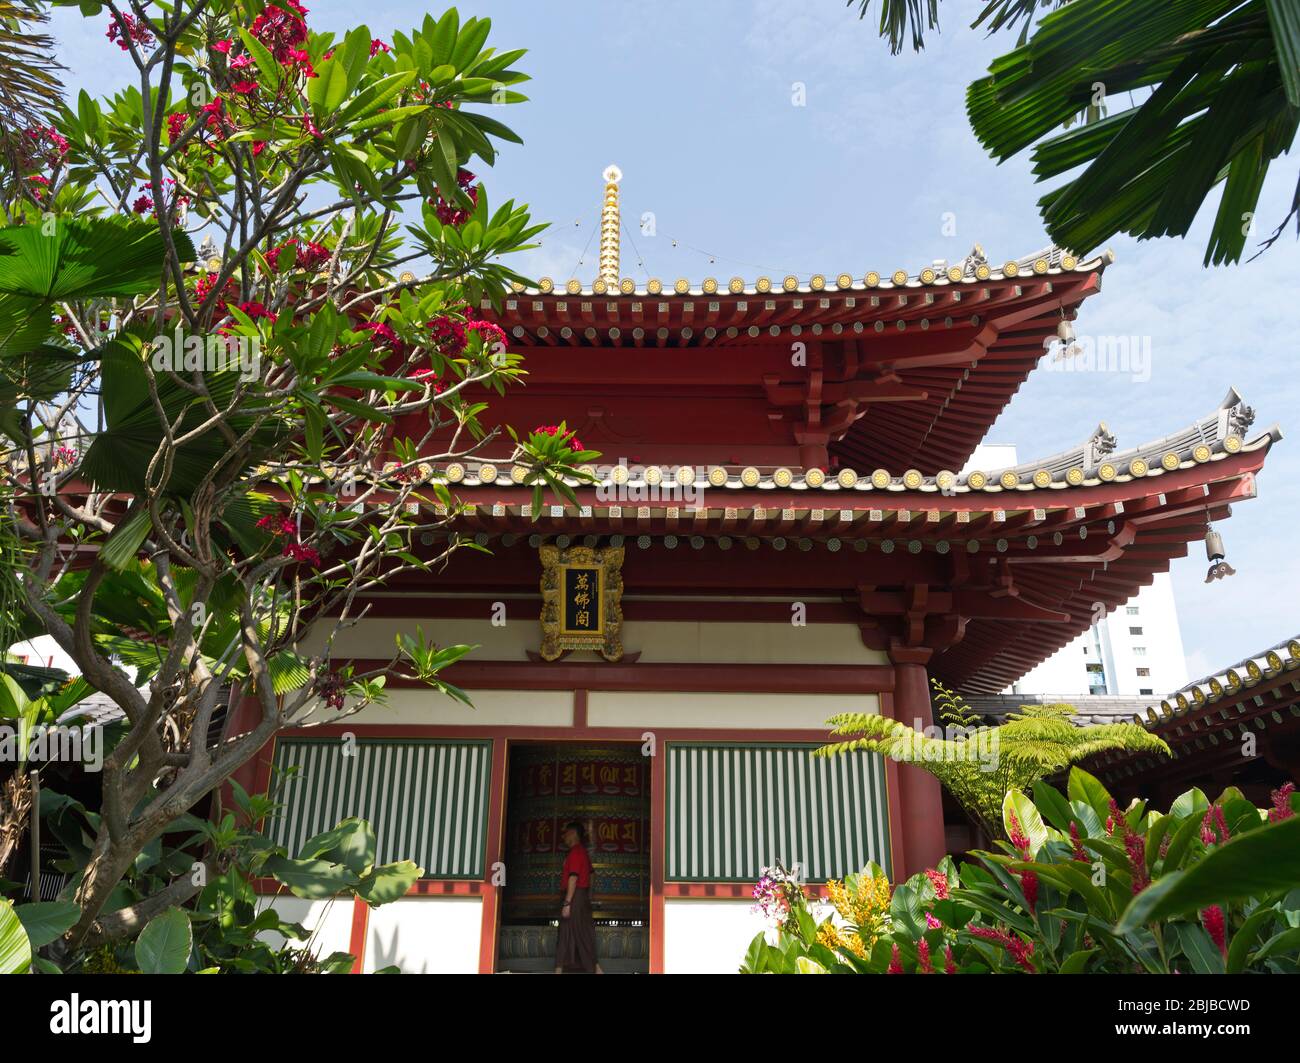 dh Buddha Tooth Relic Temple CHINATOWN SINGAPORE Buddhist temples museum roof garden housing prayer wheel buddhism rooftop city gardens Stock Photo